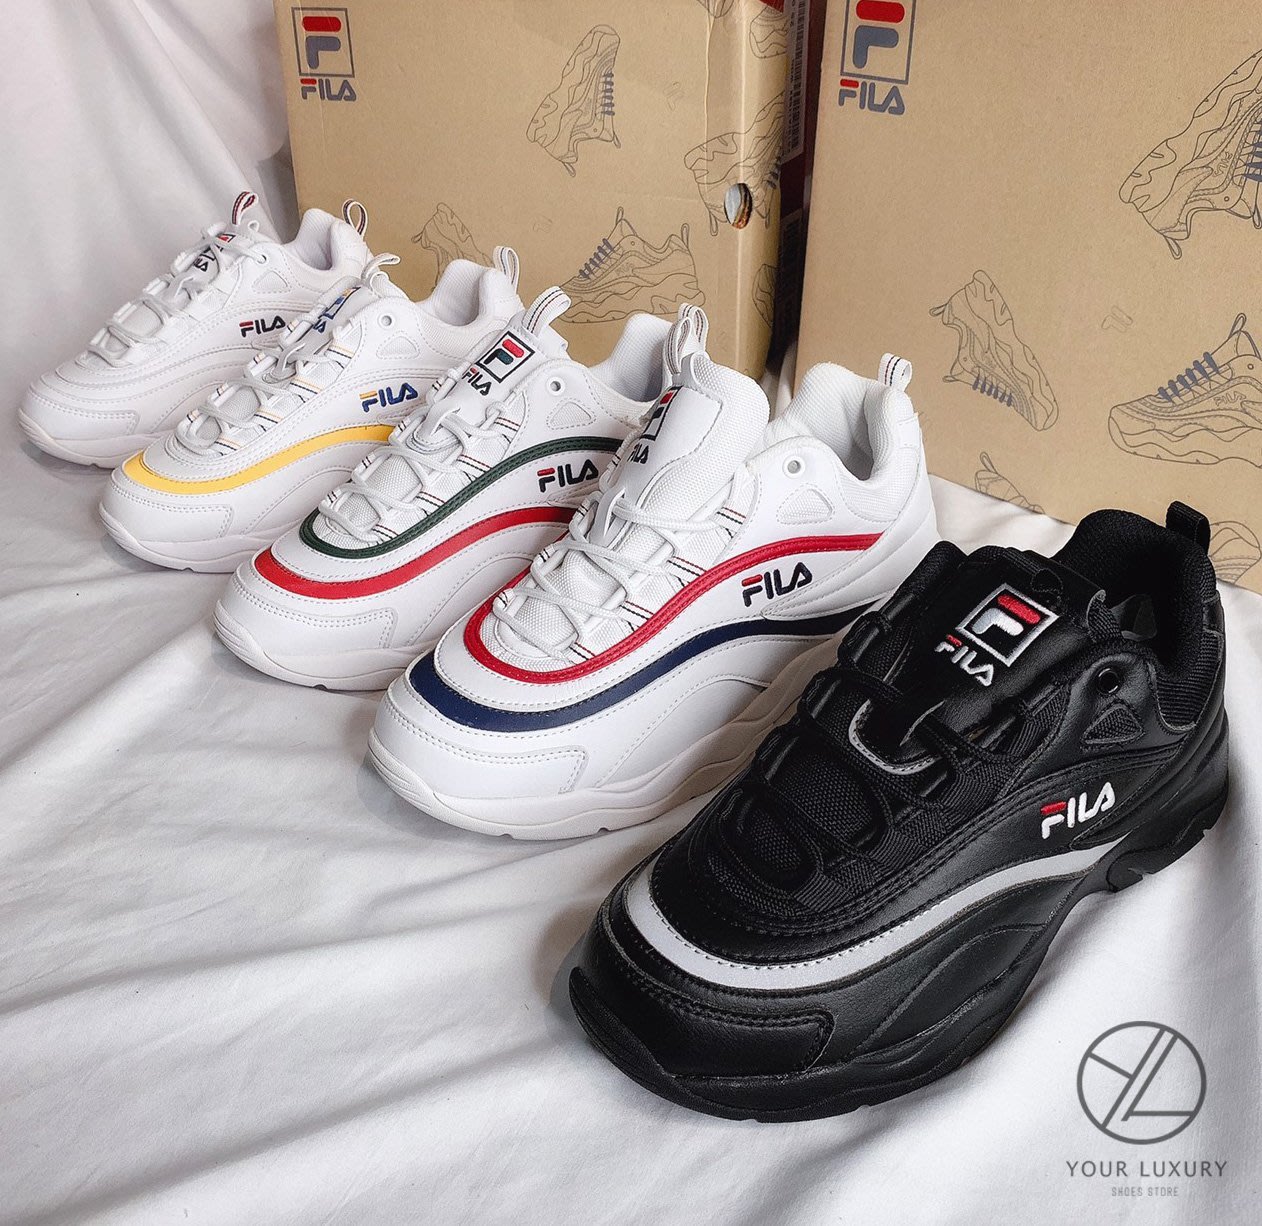 fila shoes in store